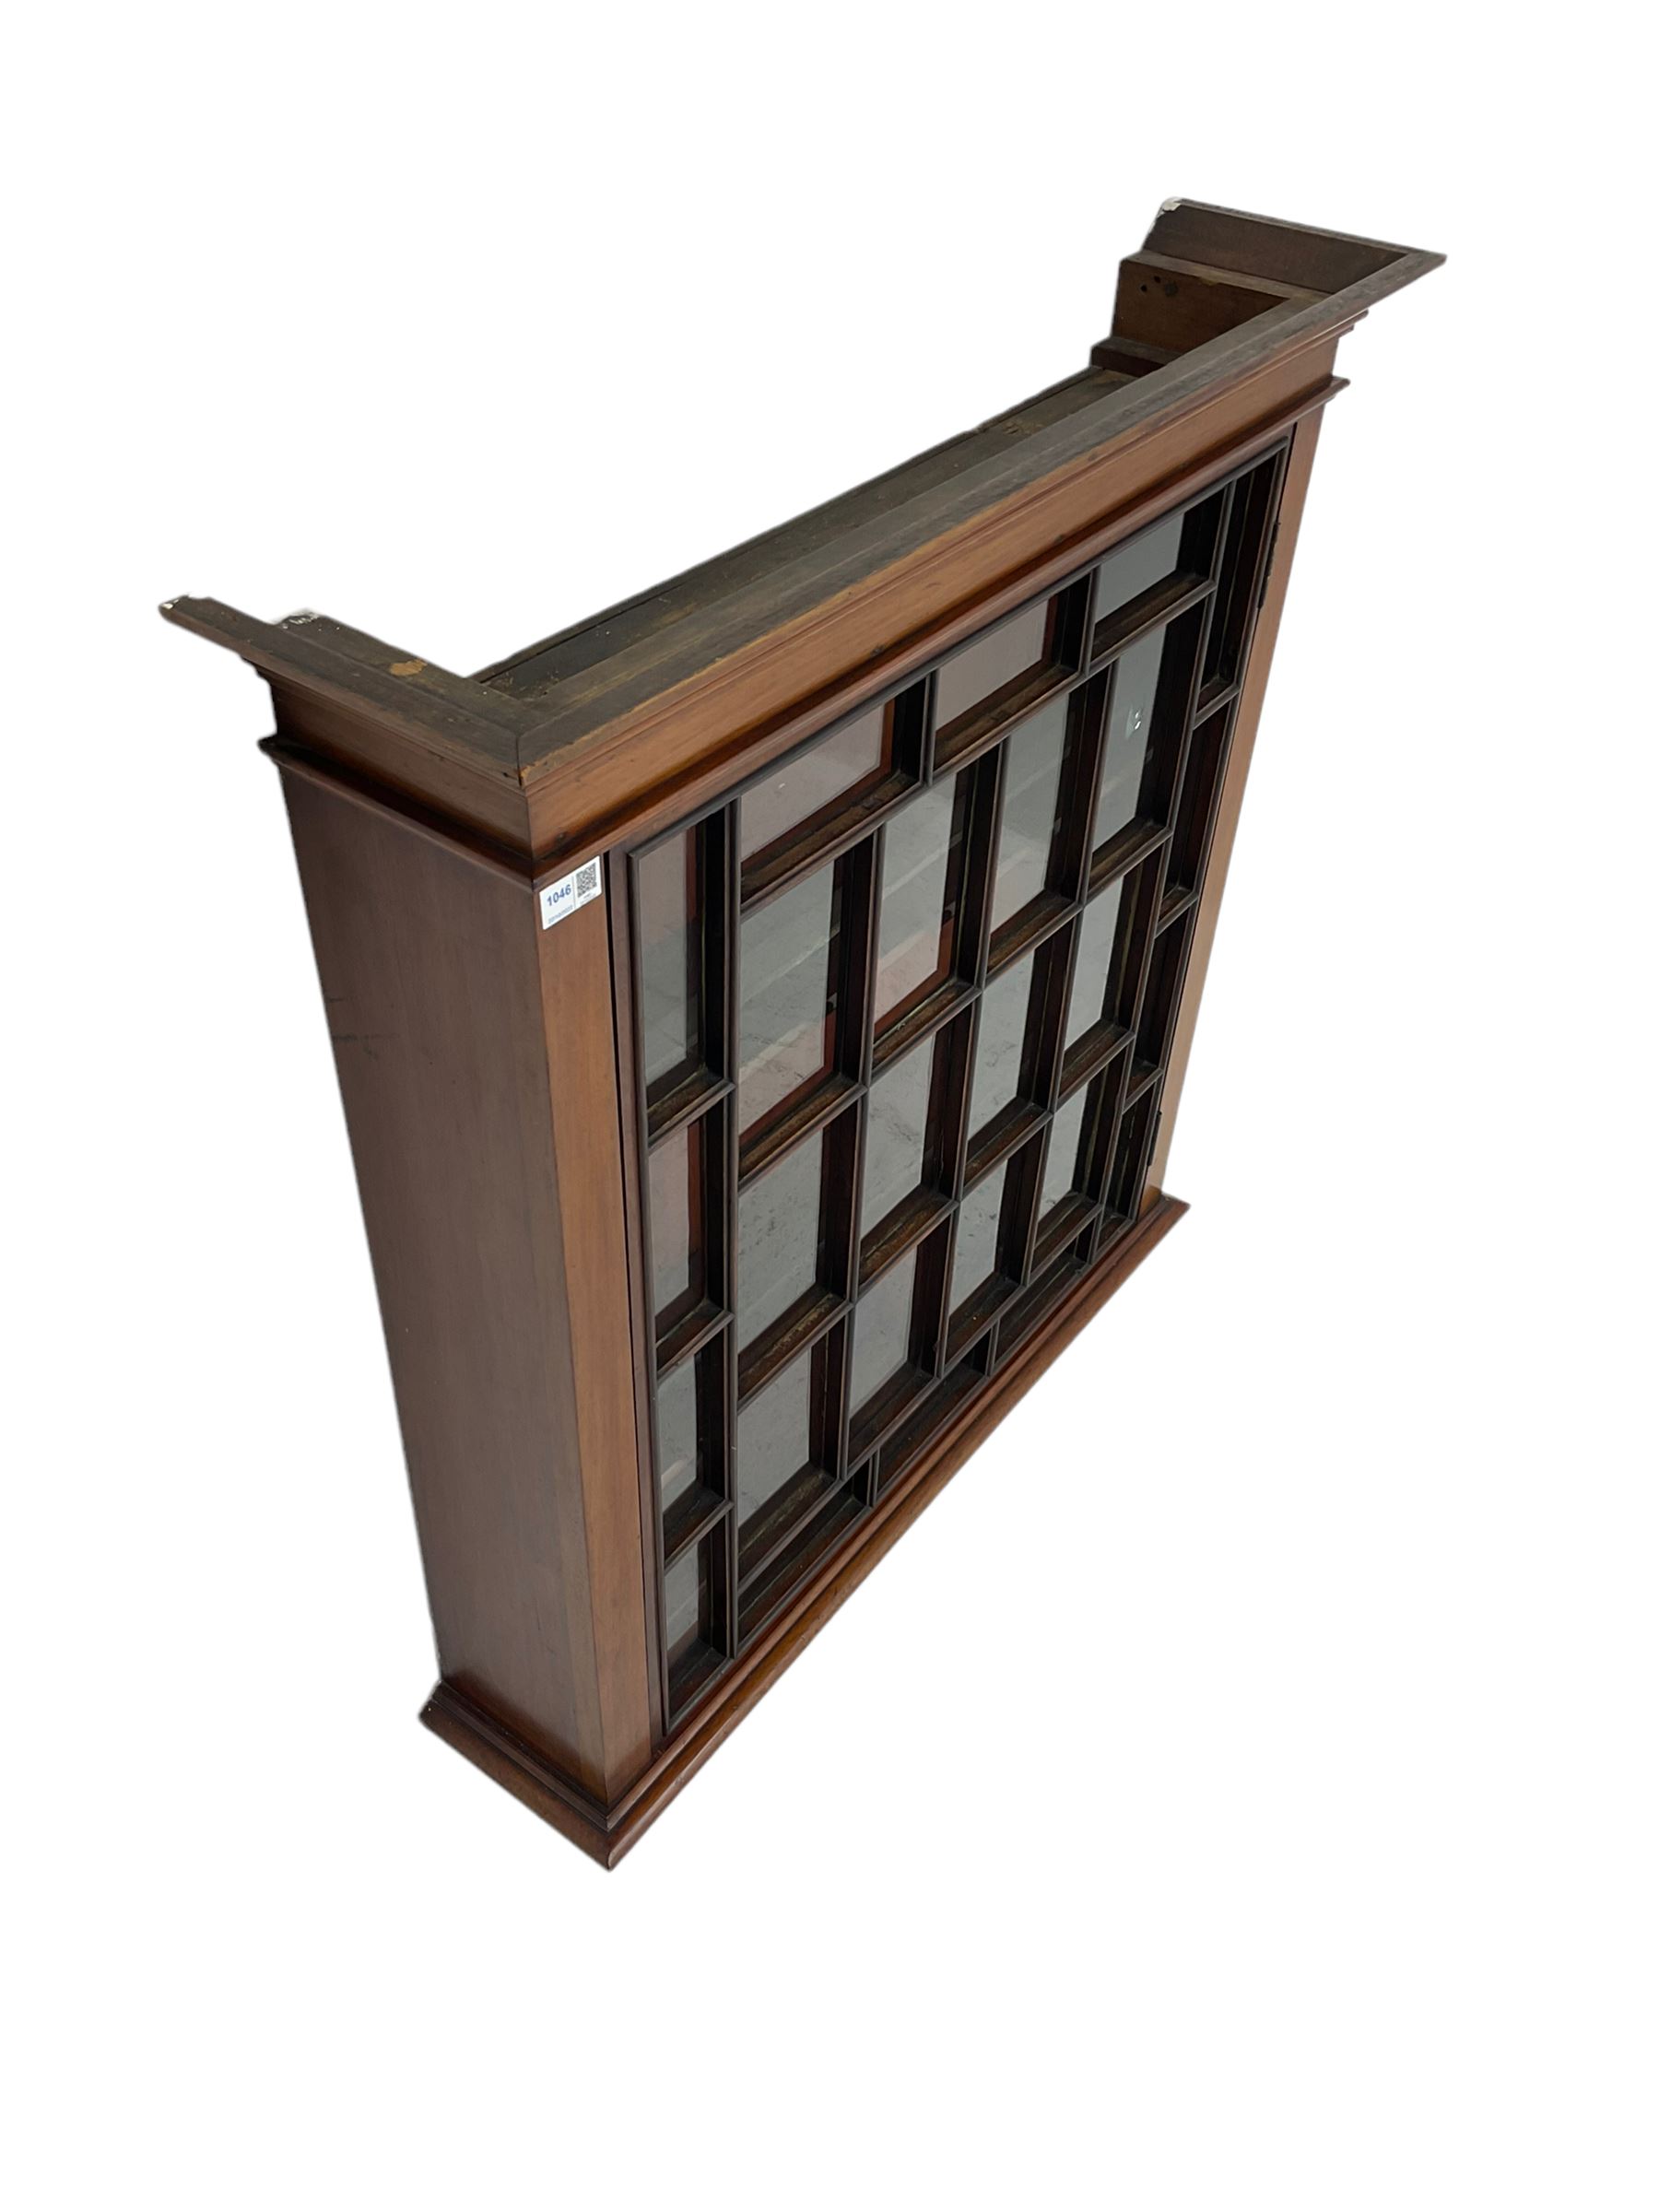 Early 20th century mahogany wall hanging cabinet - Image 4 of 6